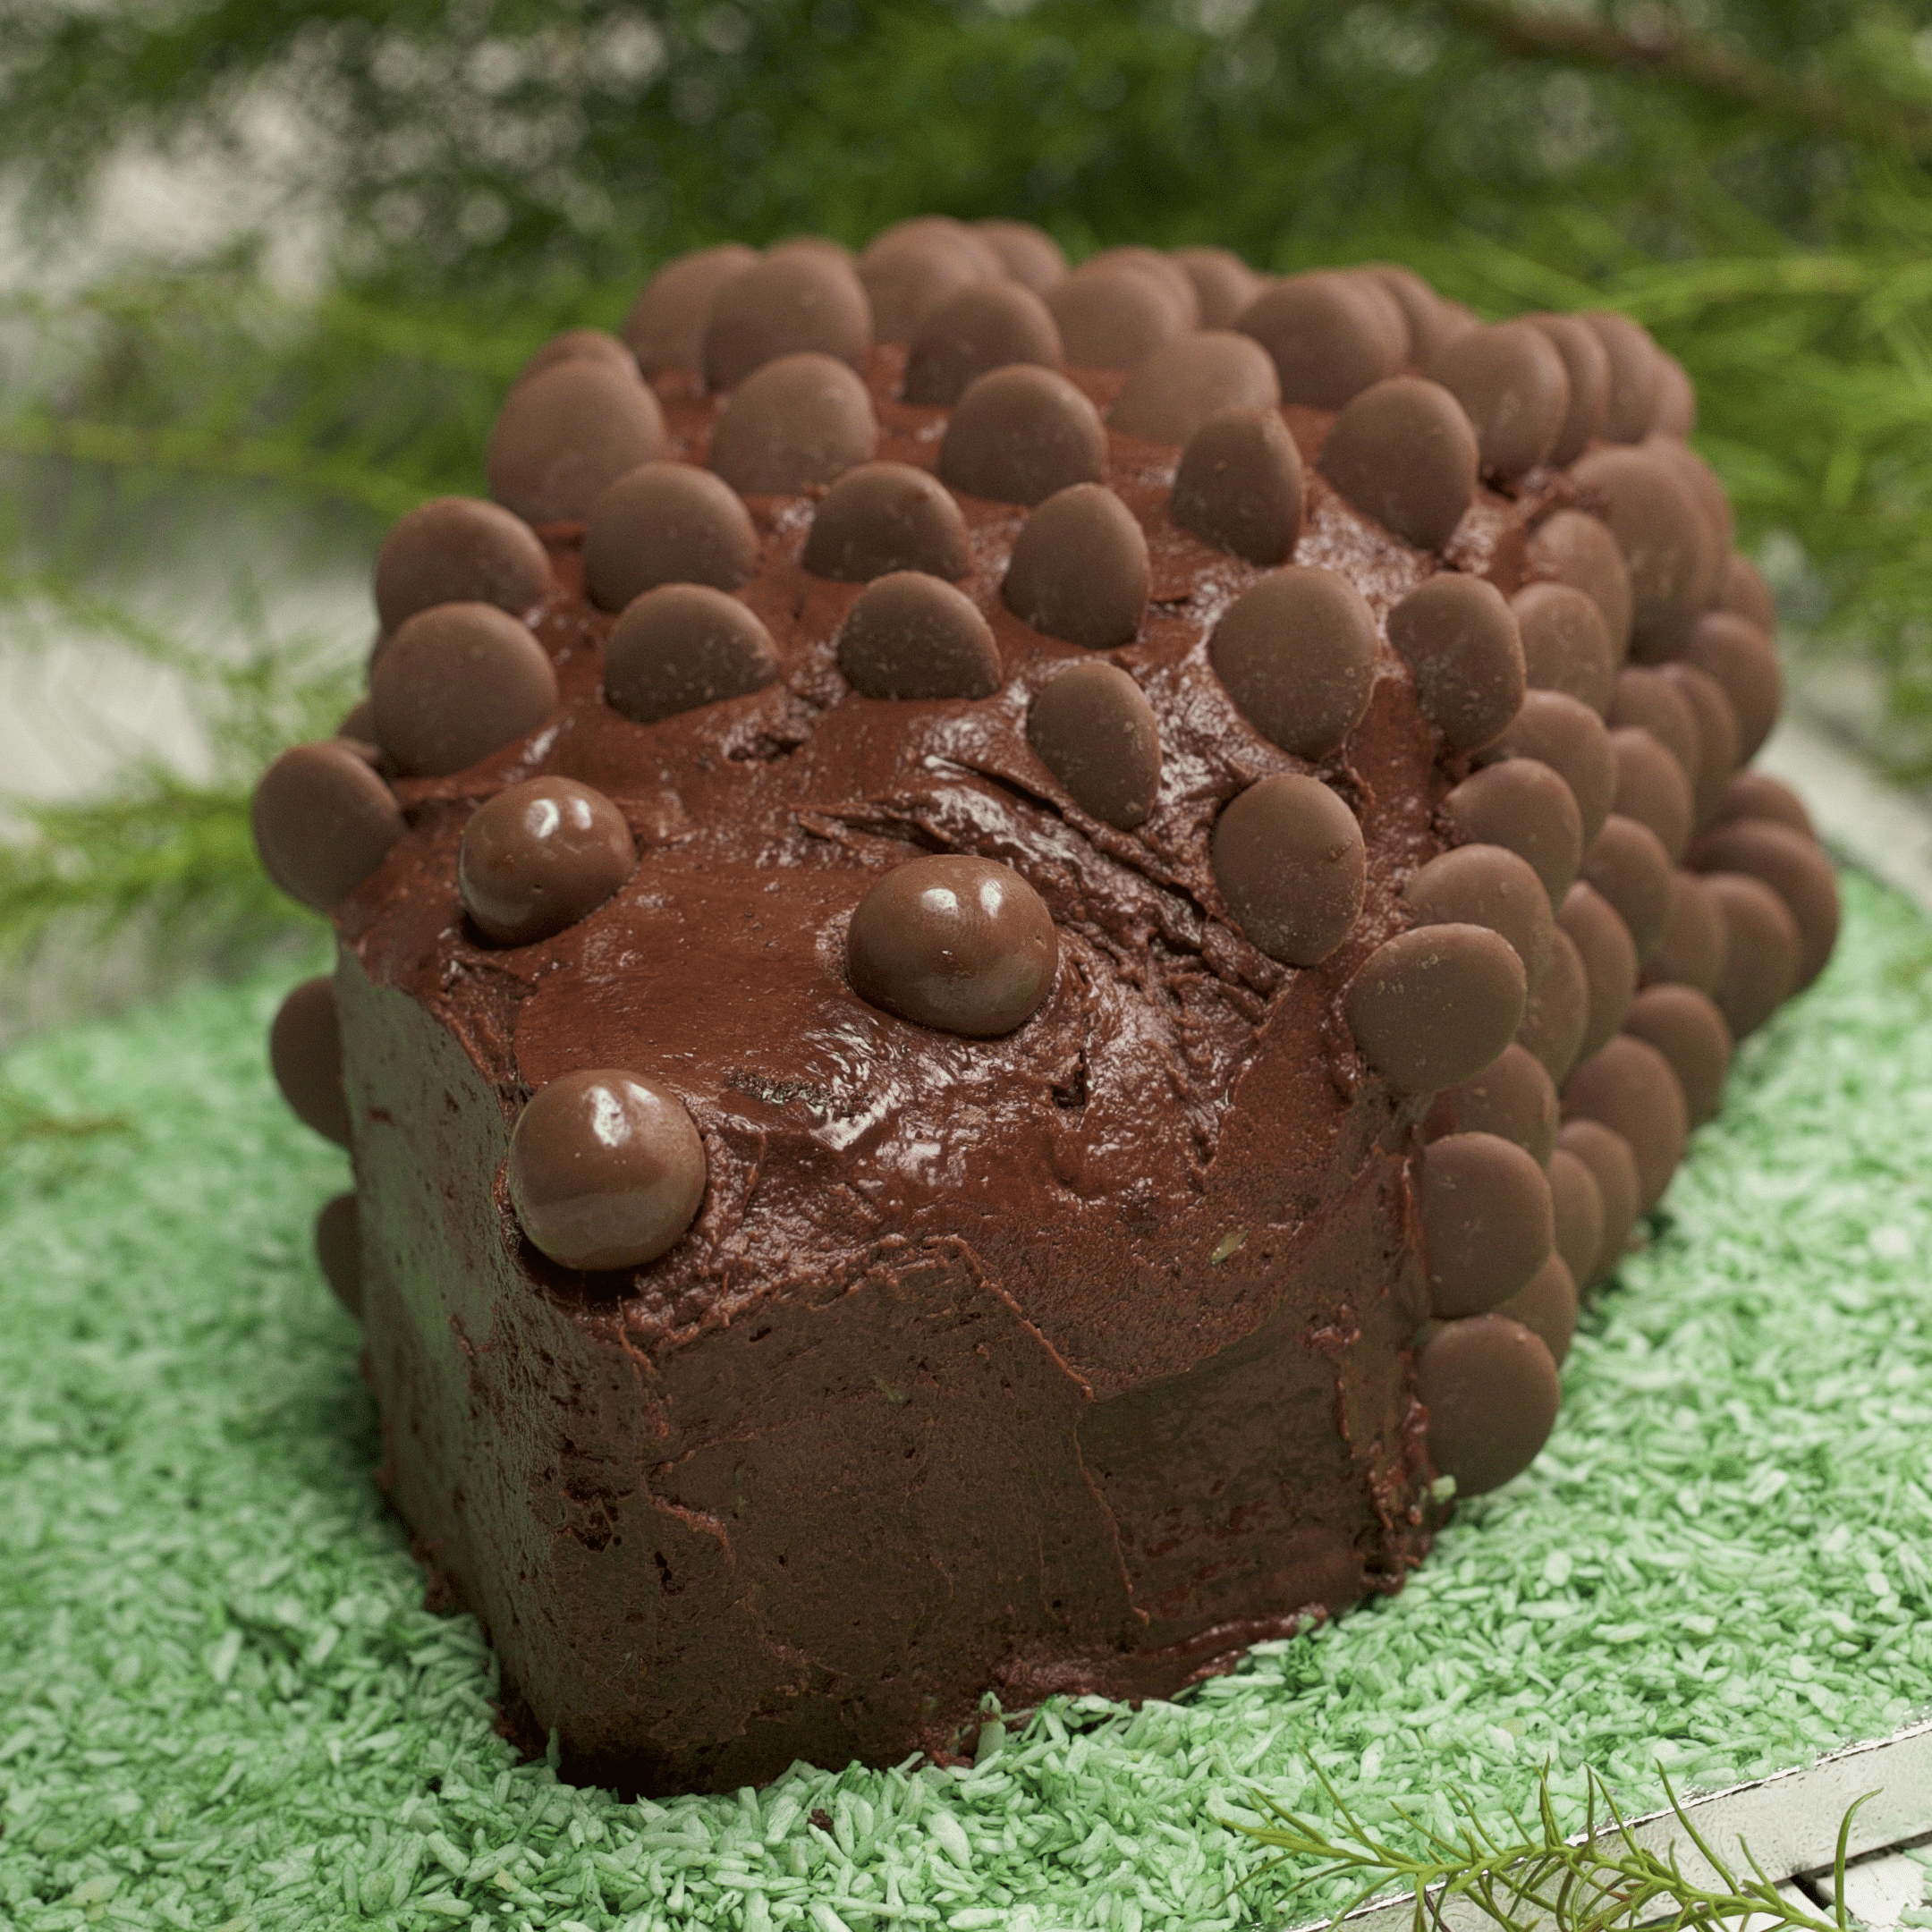 20 Times People Tried Making Hedgehog Cakes And Didn't Quite Succeed |  DeMilked